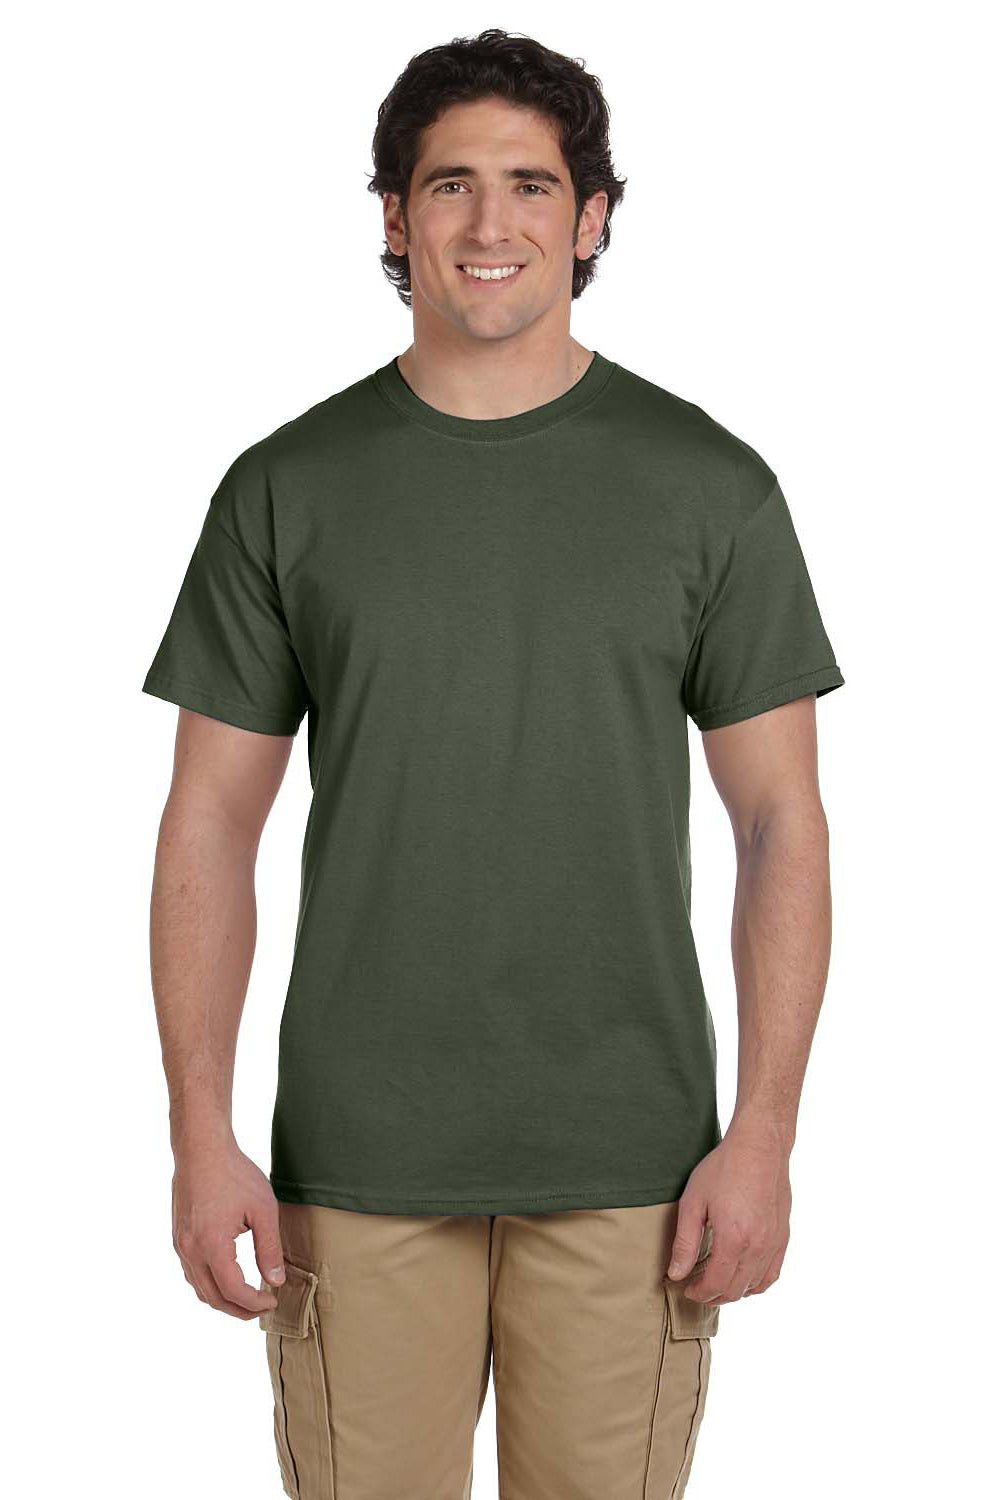 Fruit Of The Loom 3931 Mens HD Jersey Short Sleeve Crewneck T-Shirt Military Green Front